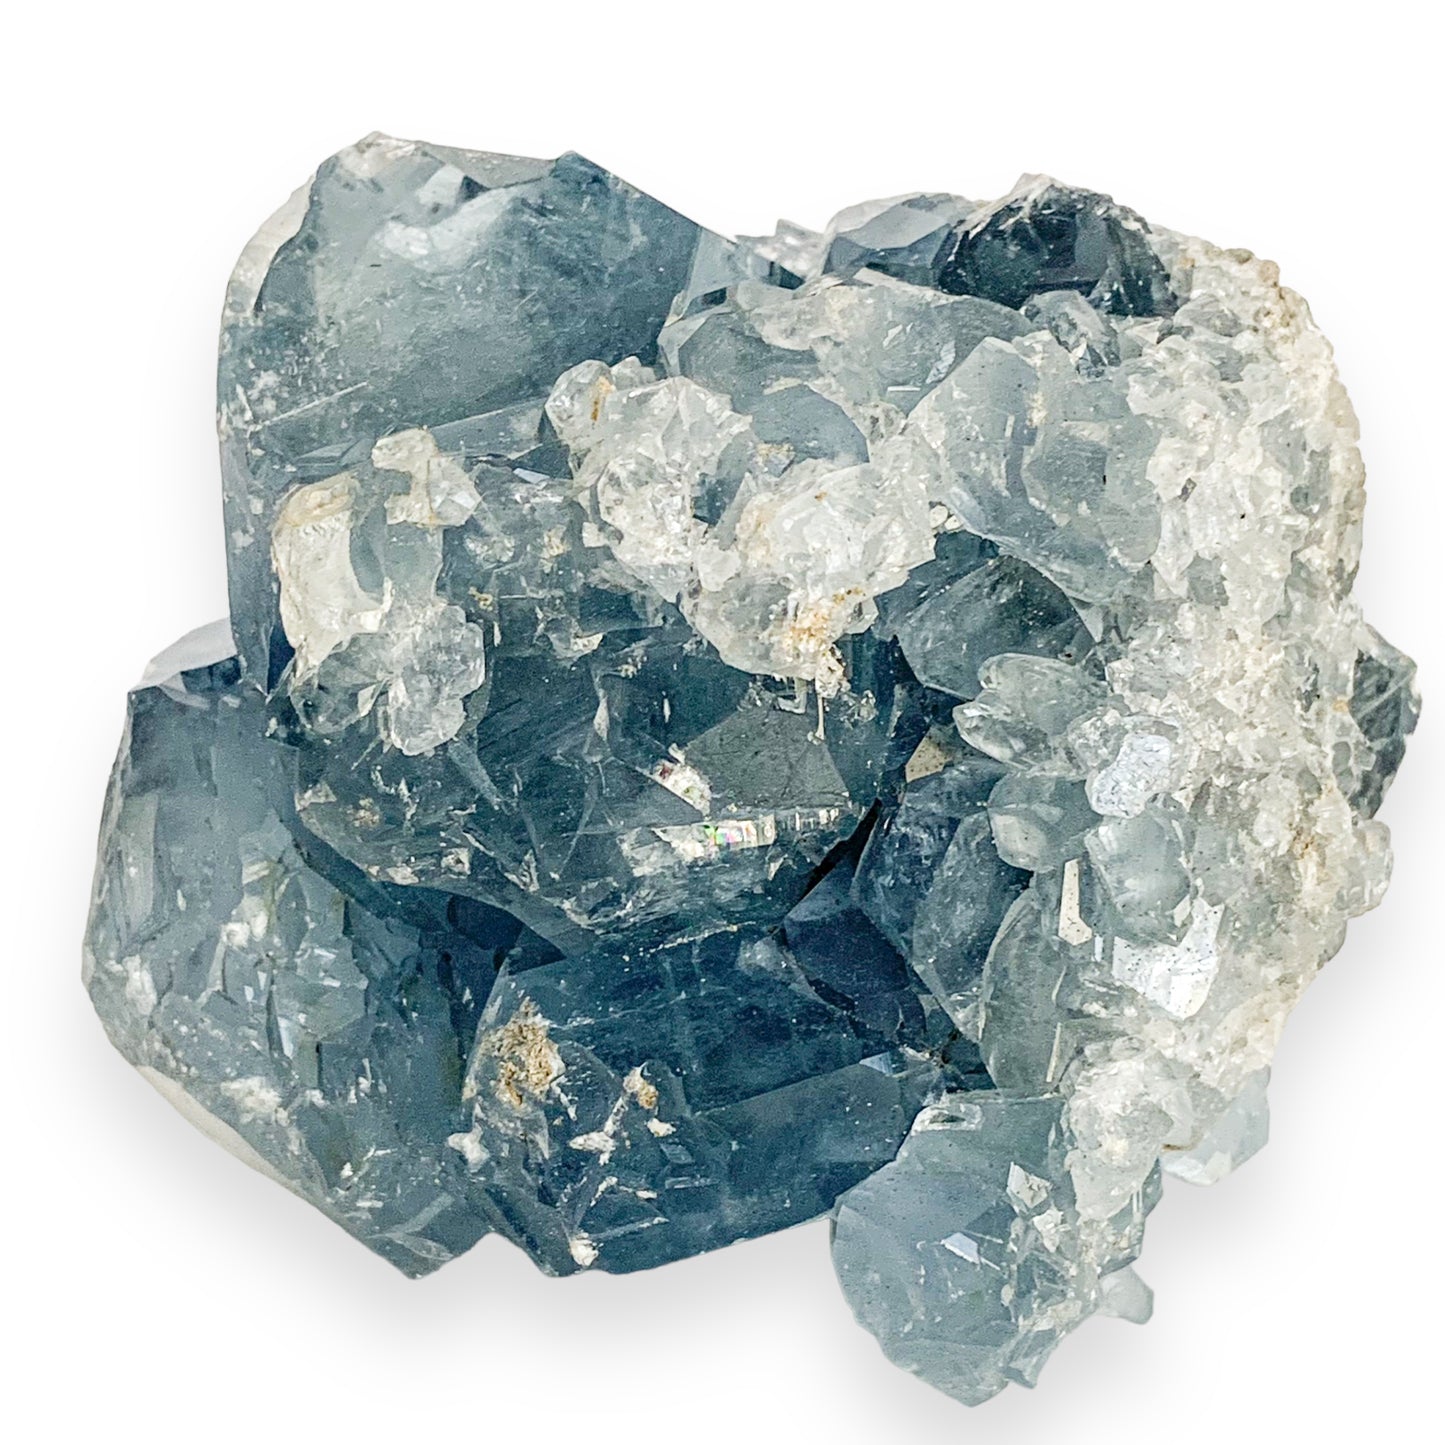 Celestite Crystal Clusters: A Beautiful and Calming Addition to Any Space